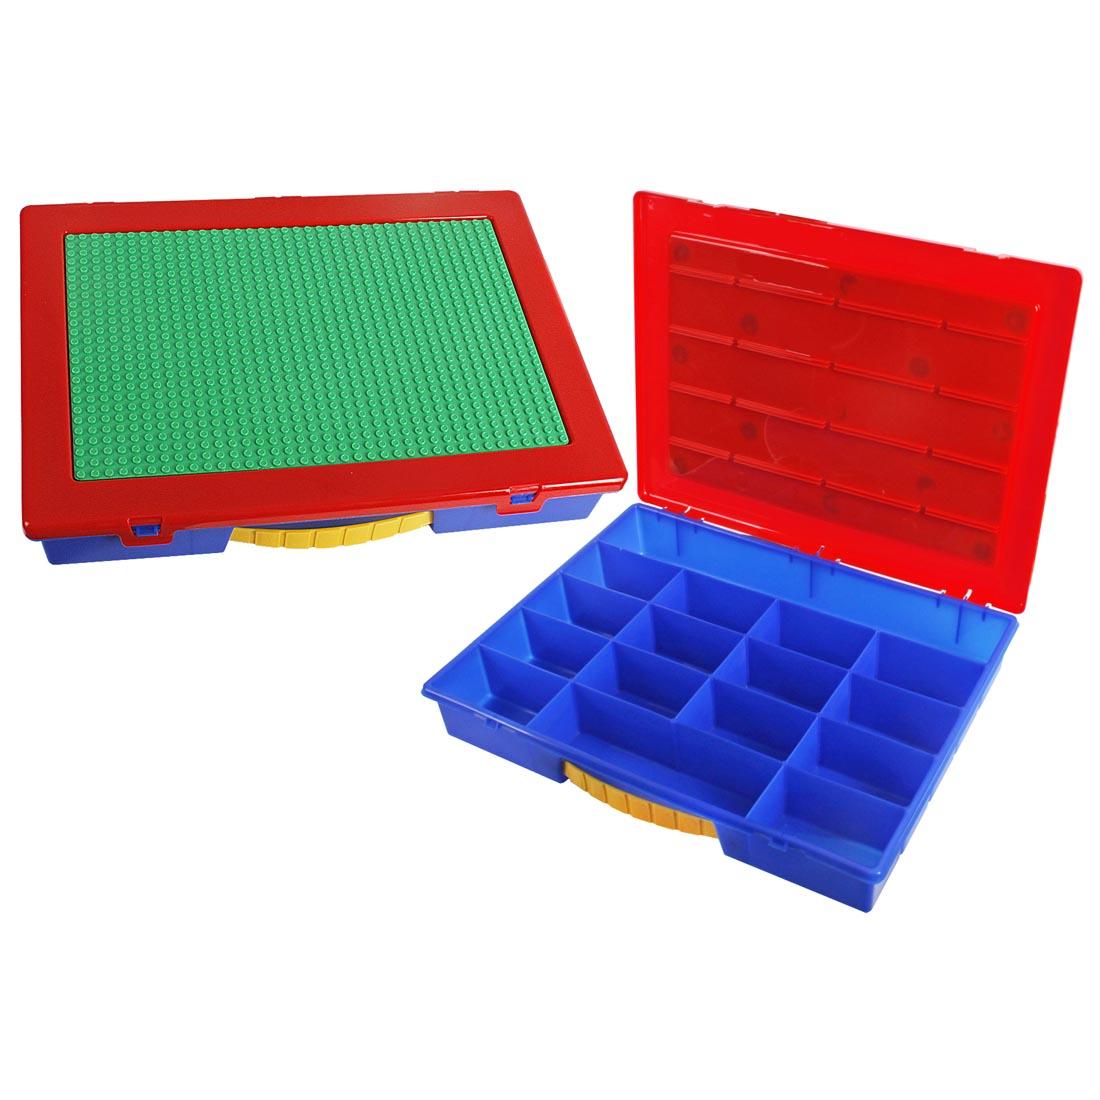 Large Organizer Case by Romanoff Products shown both closed and open